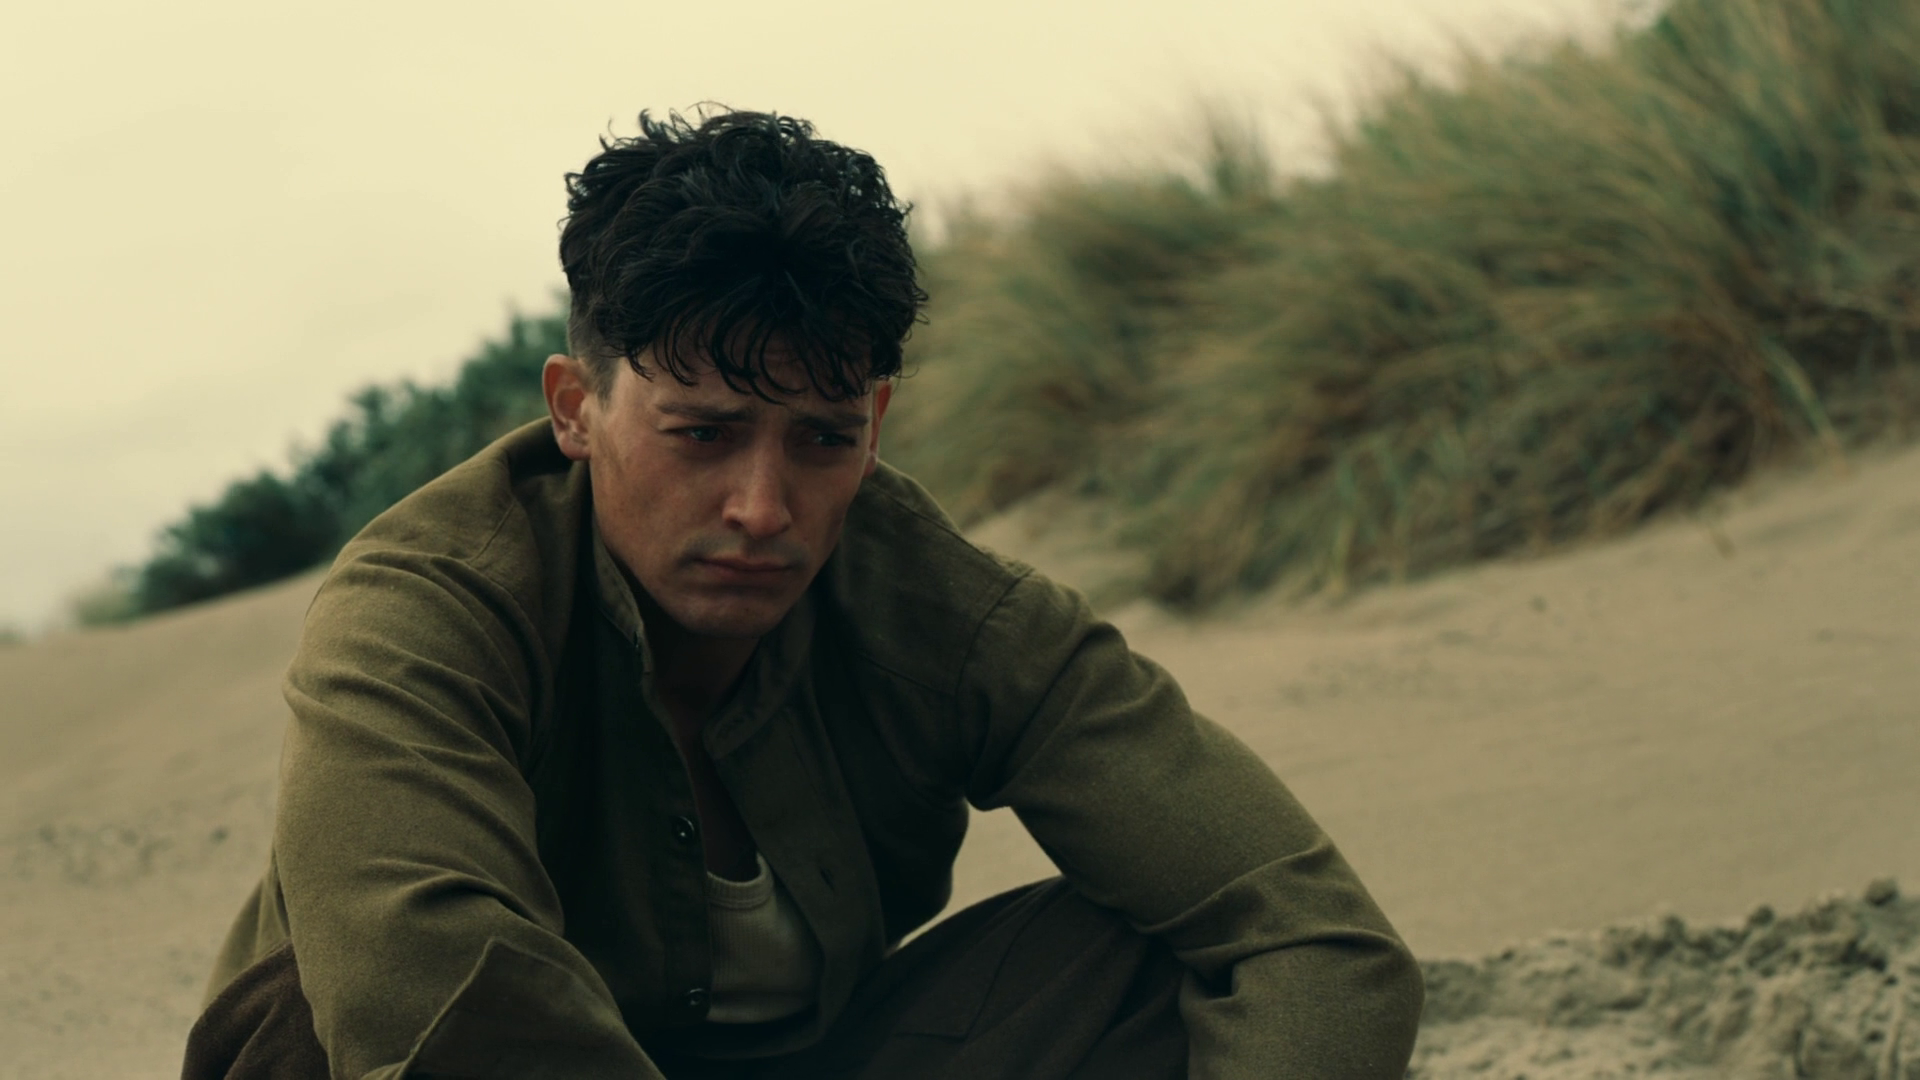 ؿ̶/ؿ˶˴ж Dunkirk.2017.1080p.BluRay.x264.DTS-HD.MA.5.1-FGT 9.41GB-2.png